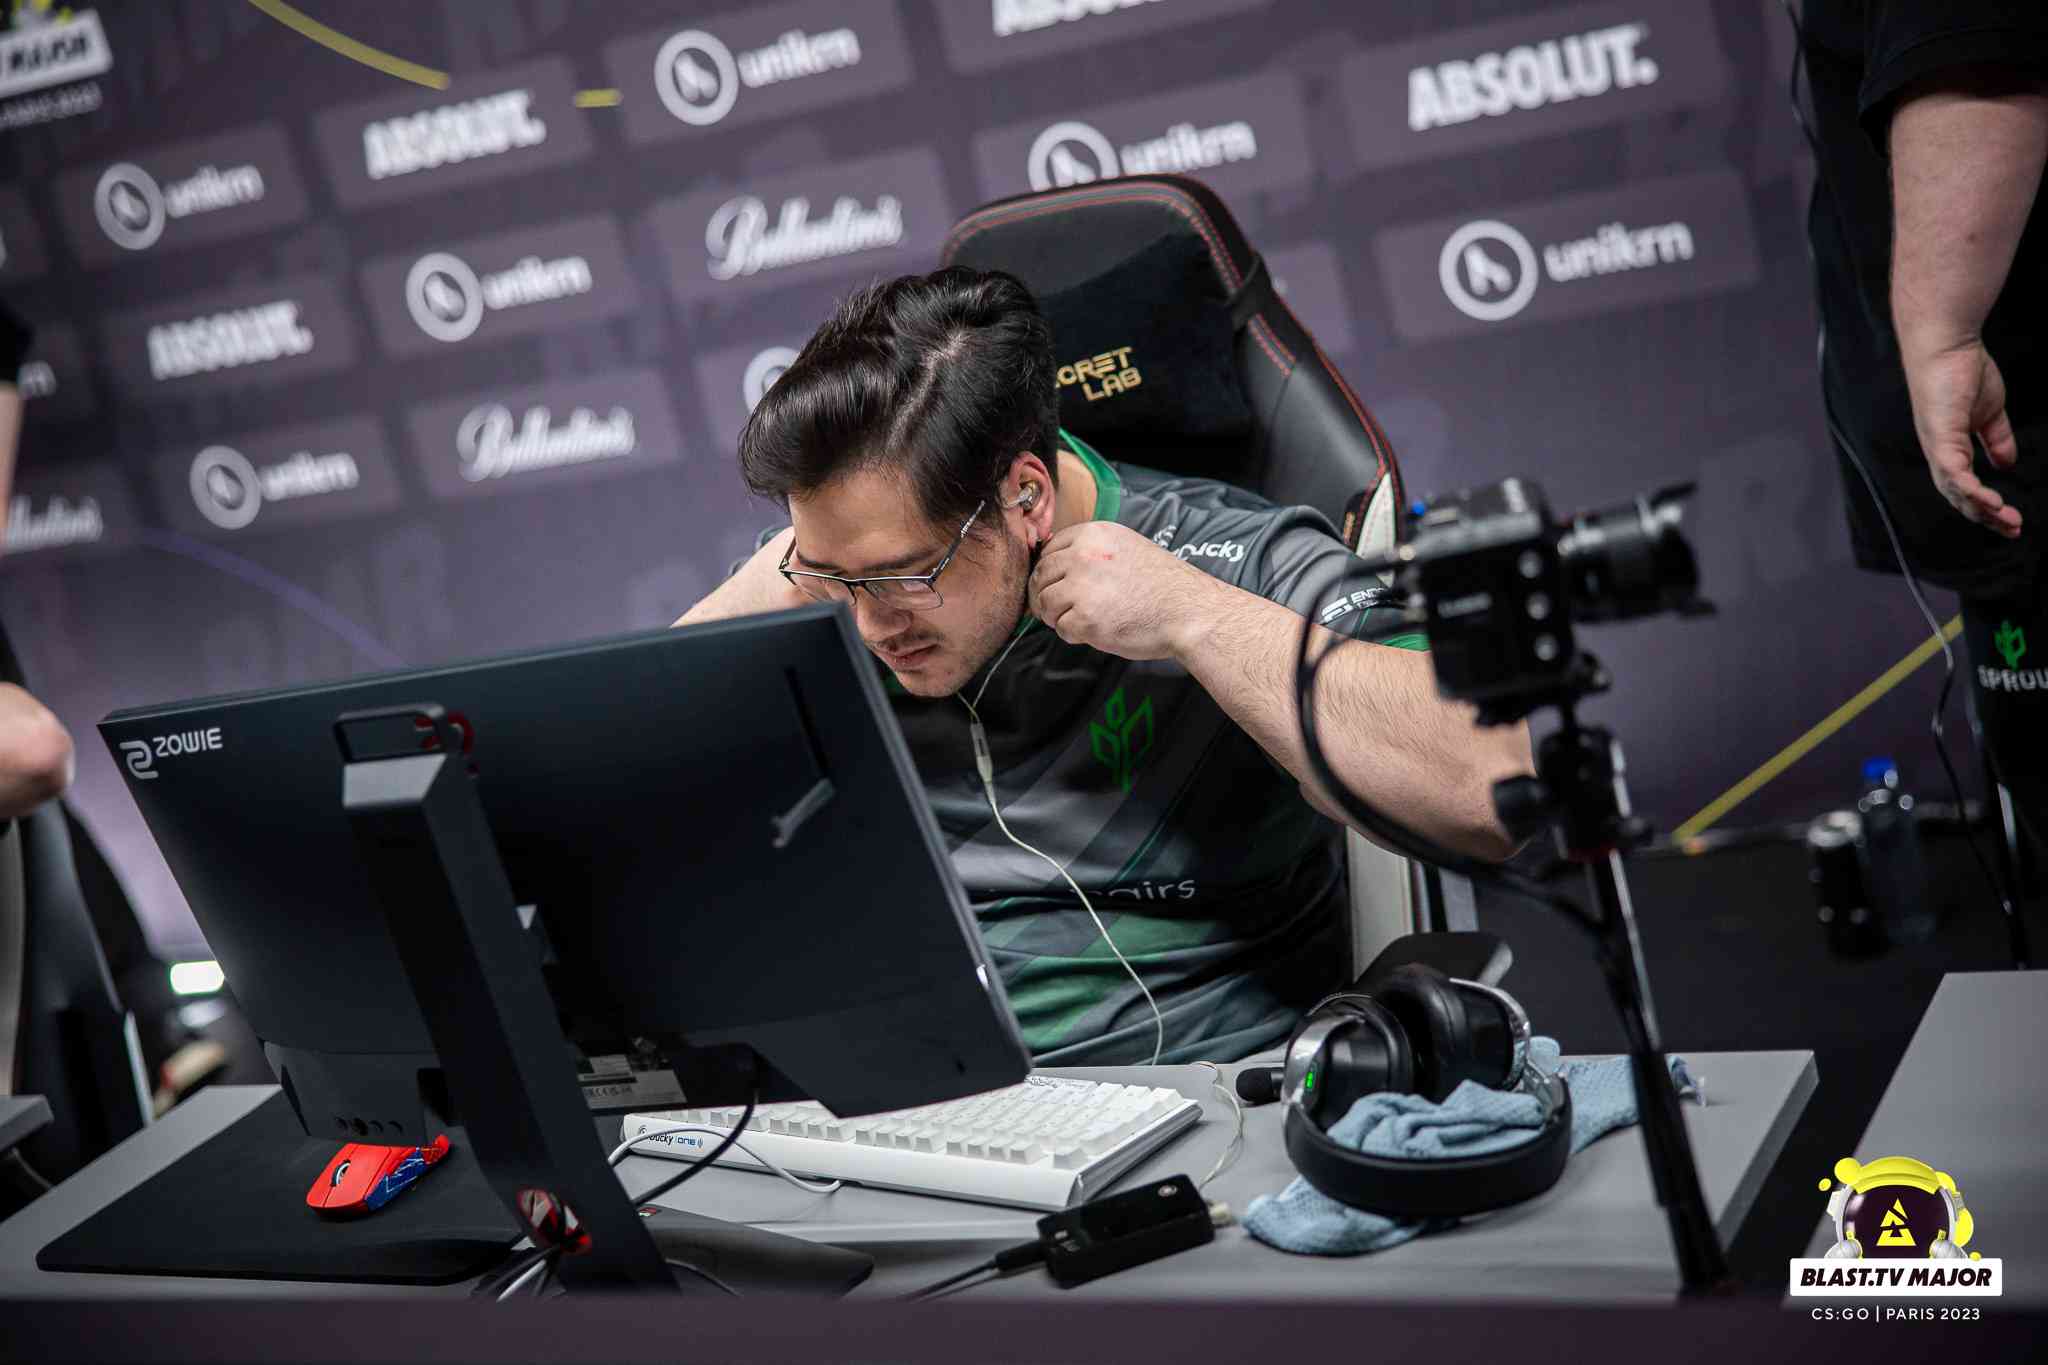 AZR puts on his headset ahead of the start of a match at the BLAST.tv Paris Major 2023: European RMR A